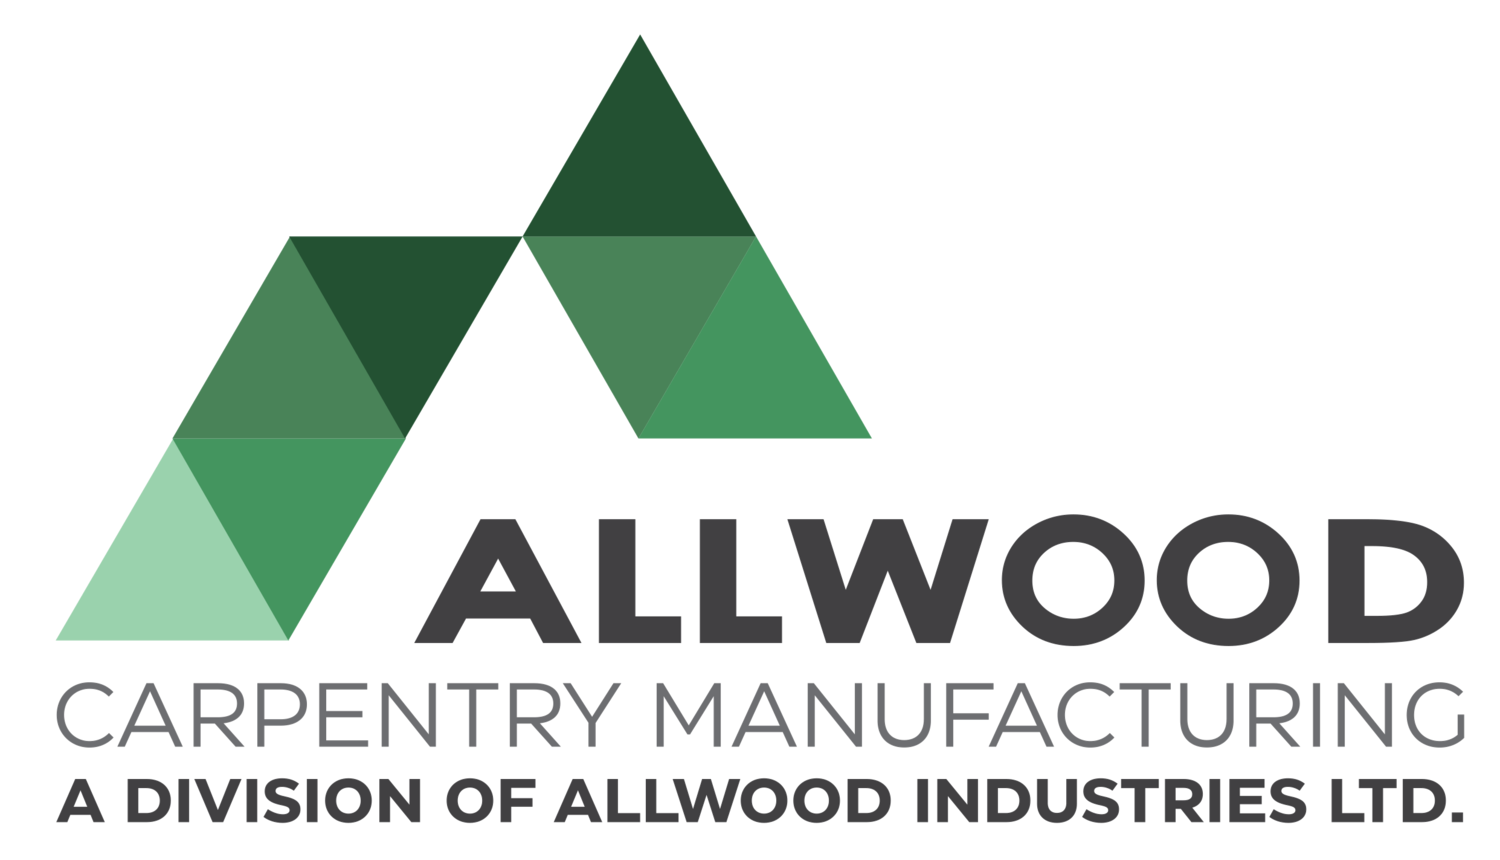 Allwood Carpentry Manufacturing